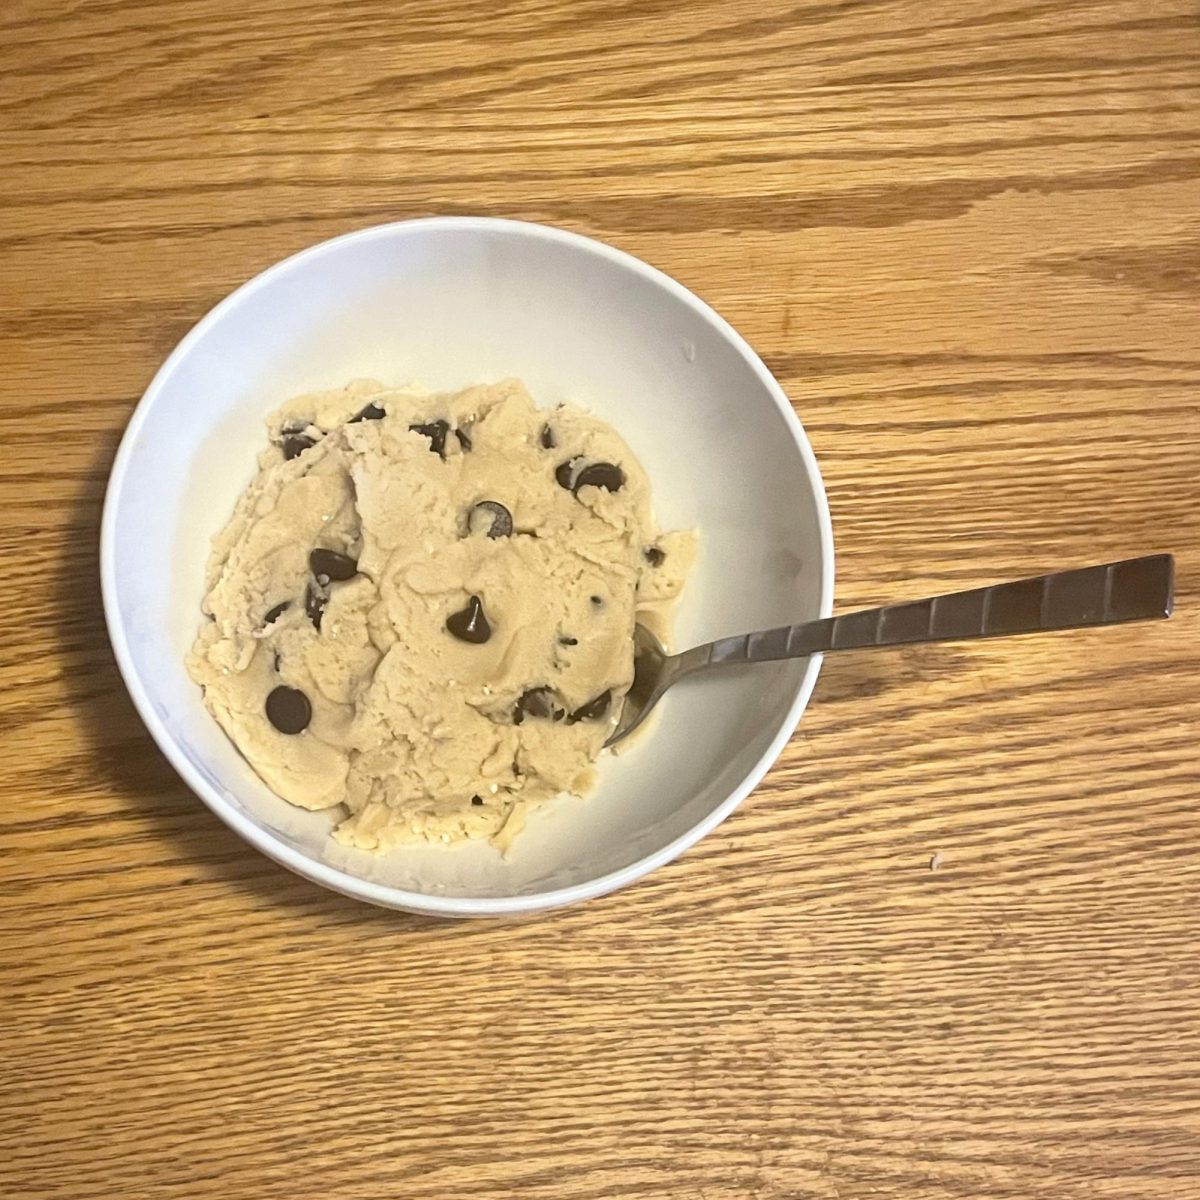 After+just+one+bite+of+this+cookie+dough%2C+it+will+quickly+become+your+not-so-guilty+pleasure+as+it+is+completely+safe+to+eat%21